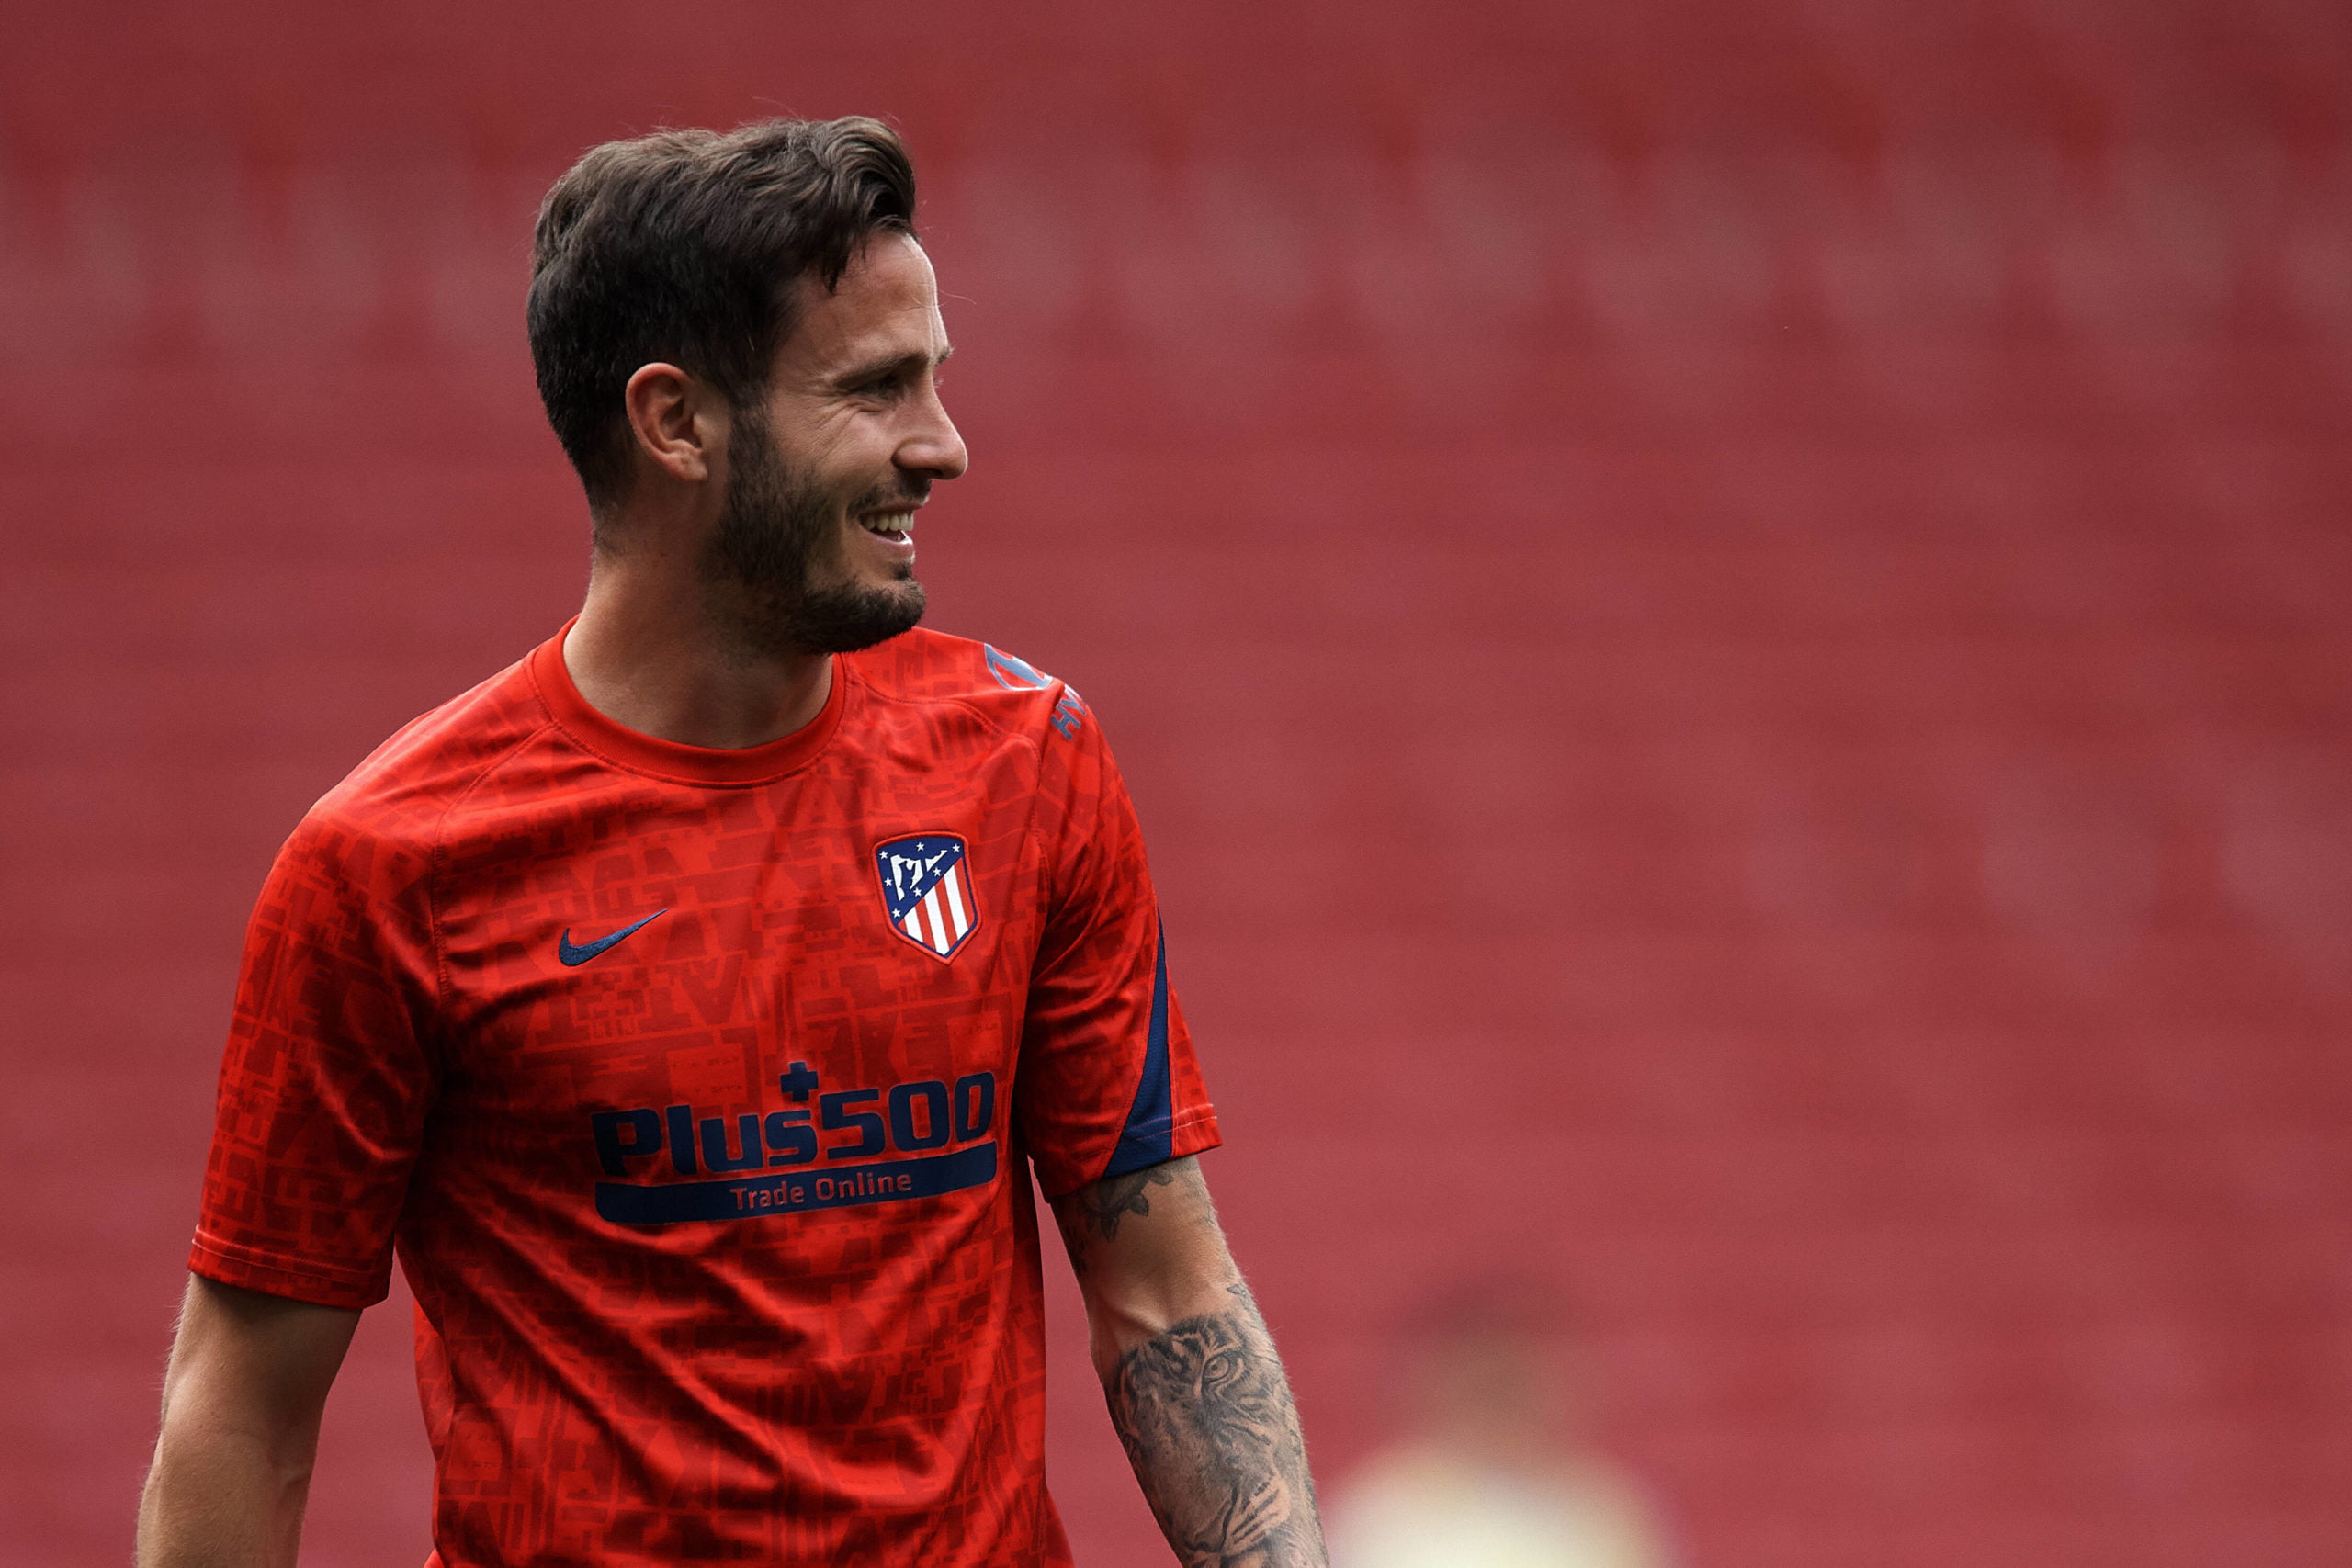 Saul Niguez keen on making a switch to Barcelona (Saul Niguez is seen in the picture)